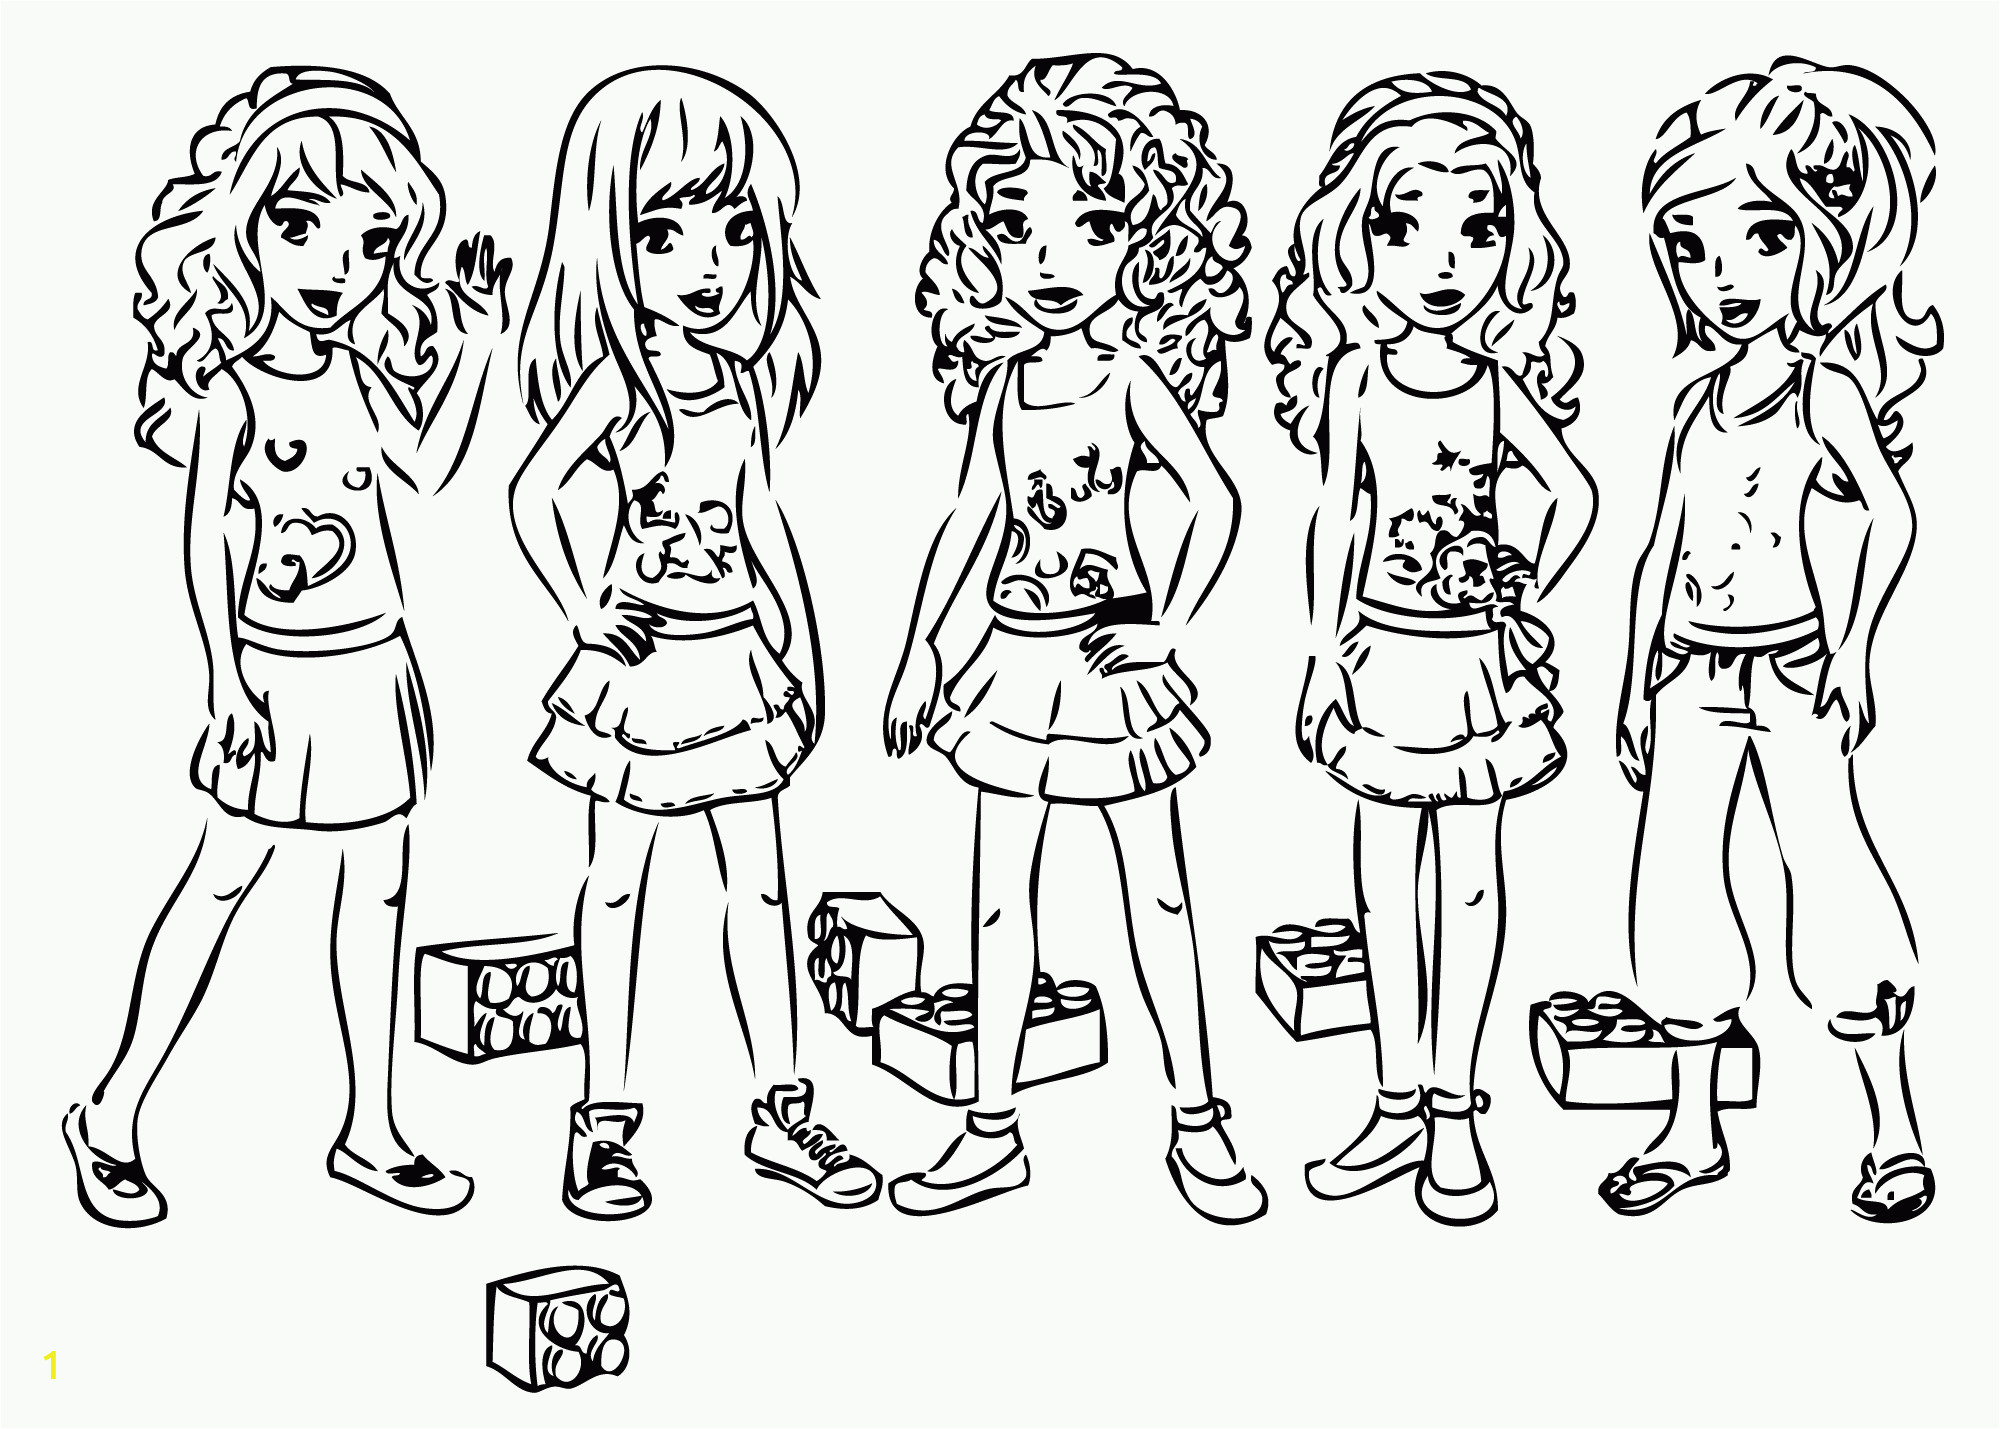 Lego Friends Coloring Pages to Print Printable Coloring Pages Lego Friends Coloring Home